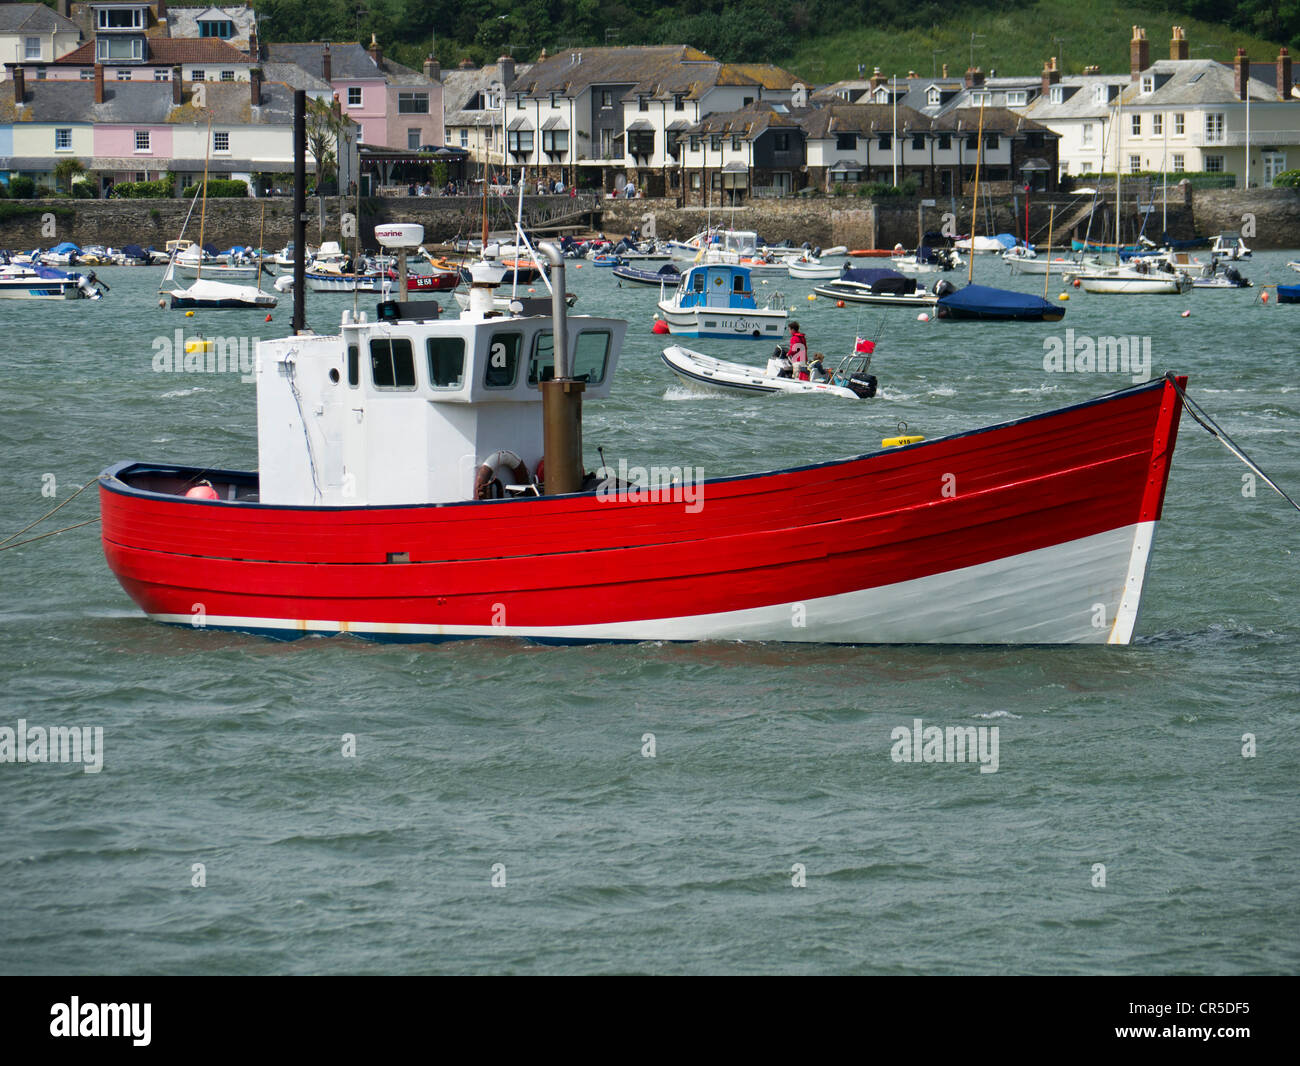 Small red and white fishing vessel in the Kingsbridge Estuary at Salcombe in Devon England Stock Photo